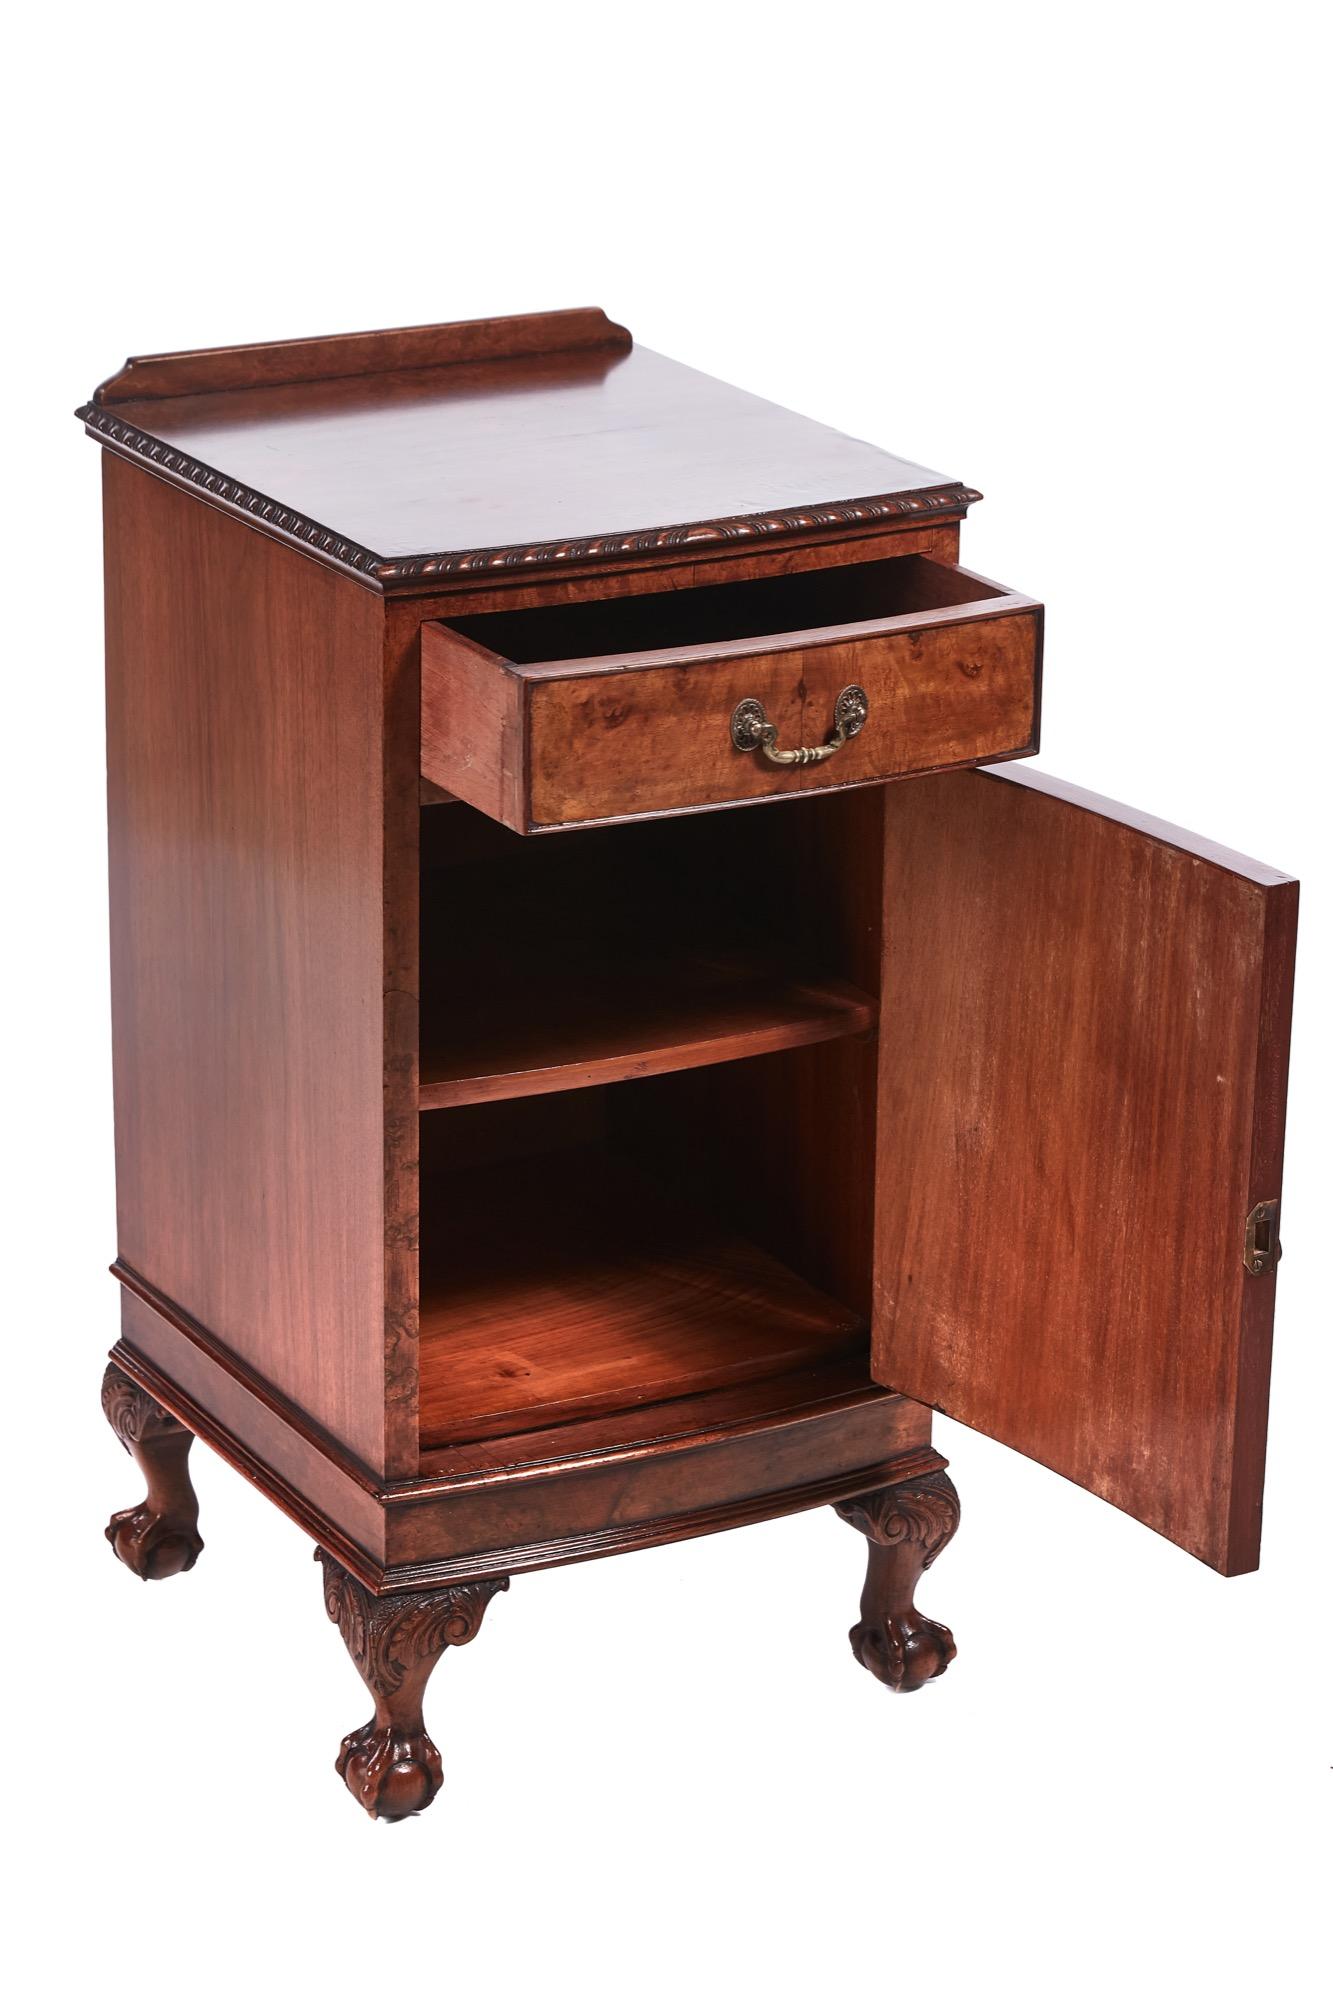 English Antique Burr Walnut Bow Fronted Bedside Cabinet